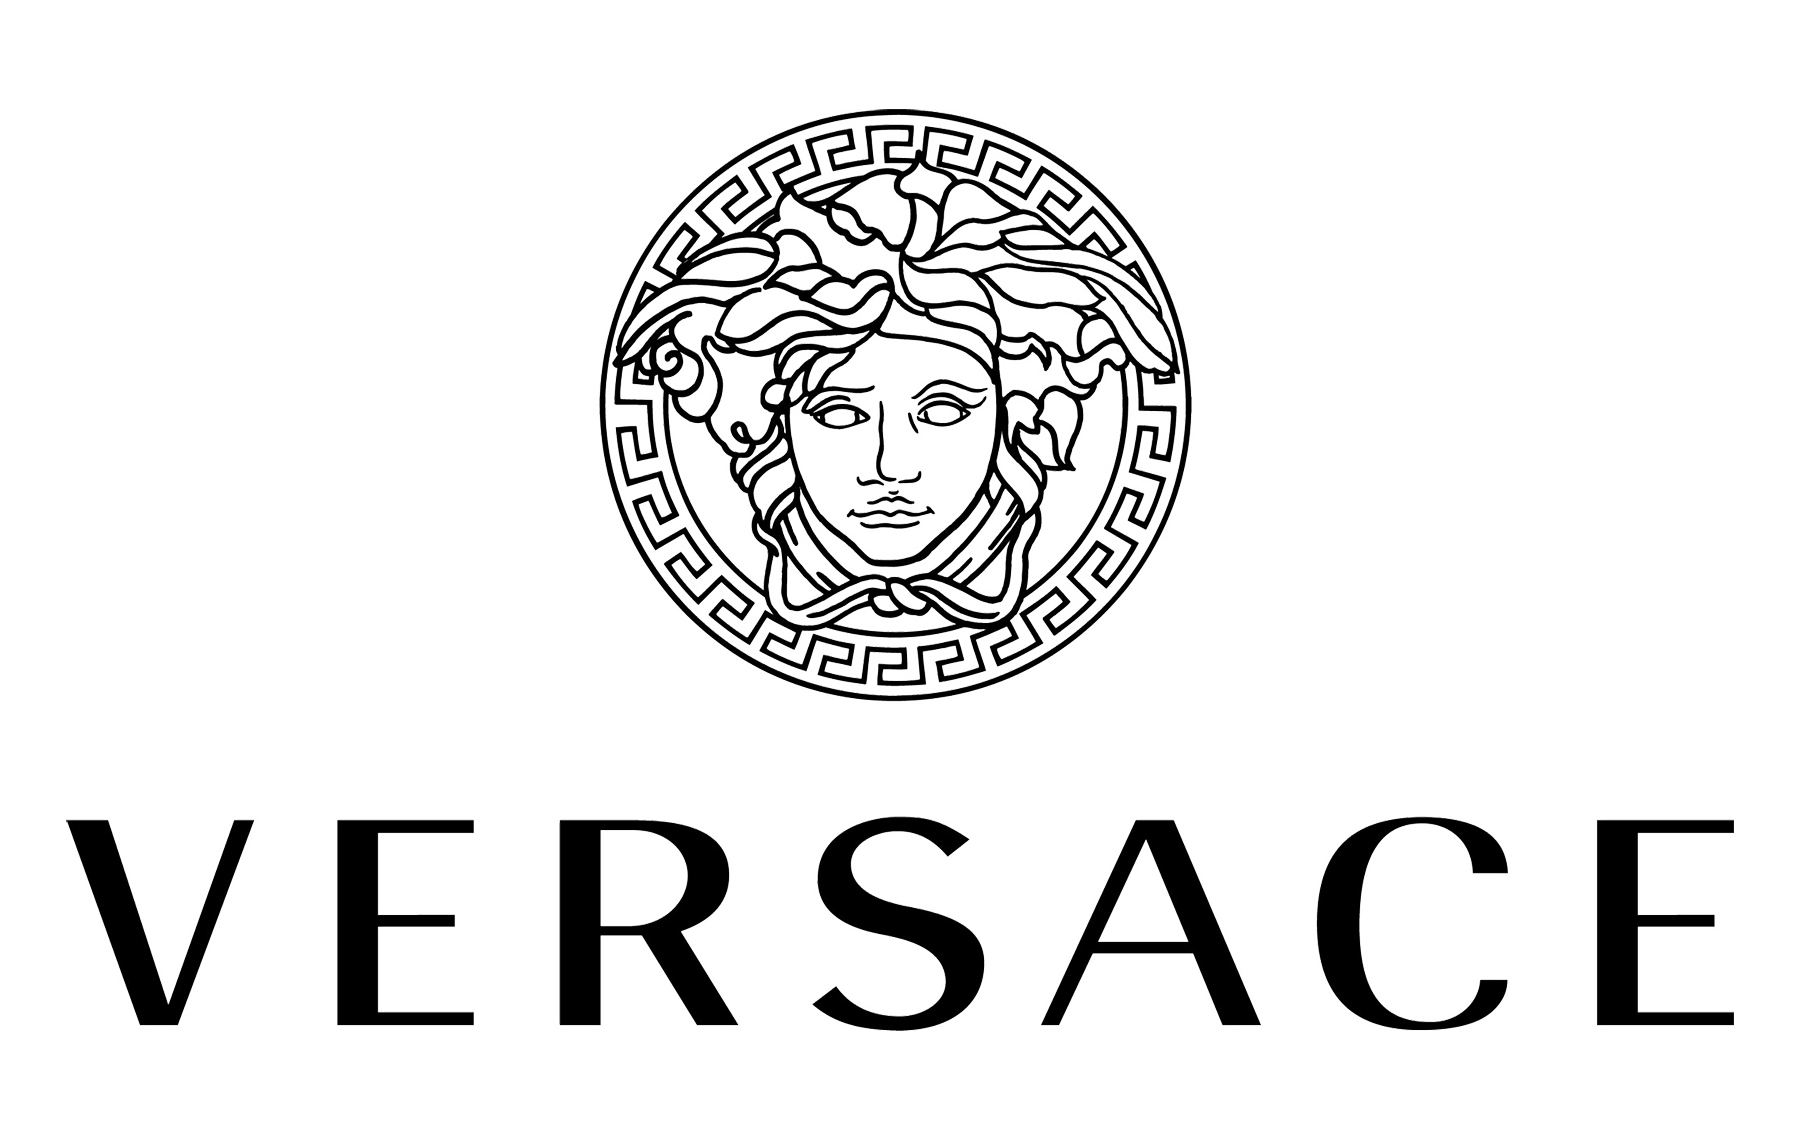 Versace Logo, Versace Symbol, Meaning, History and Evolution